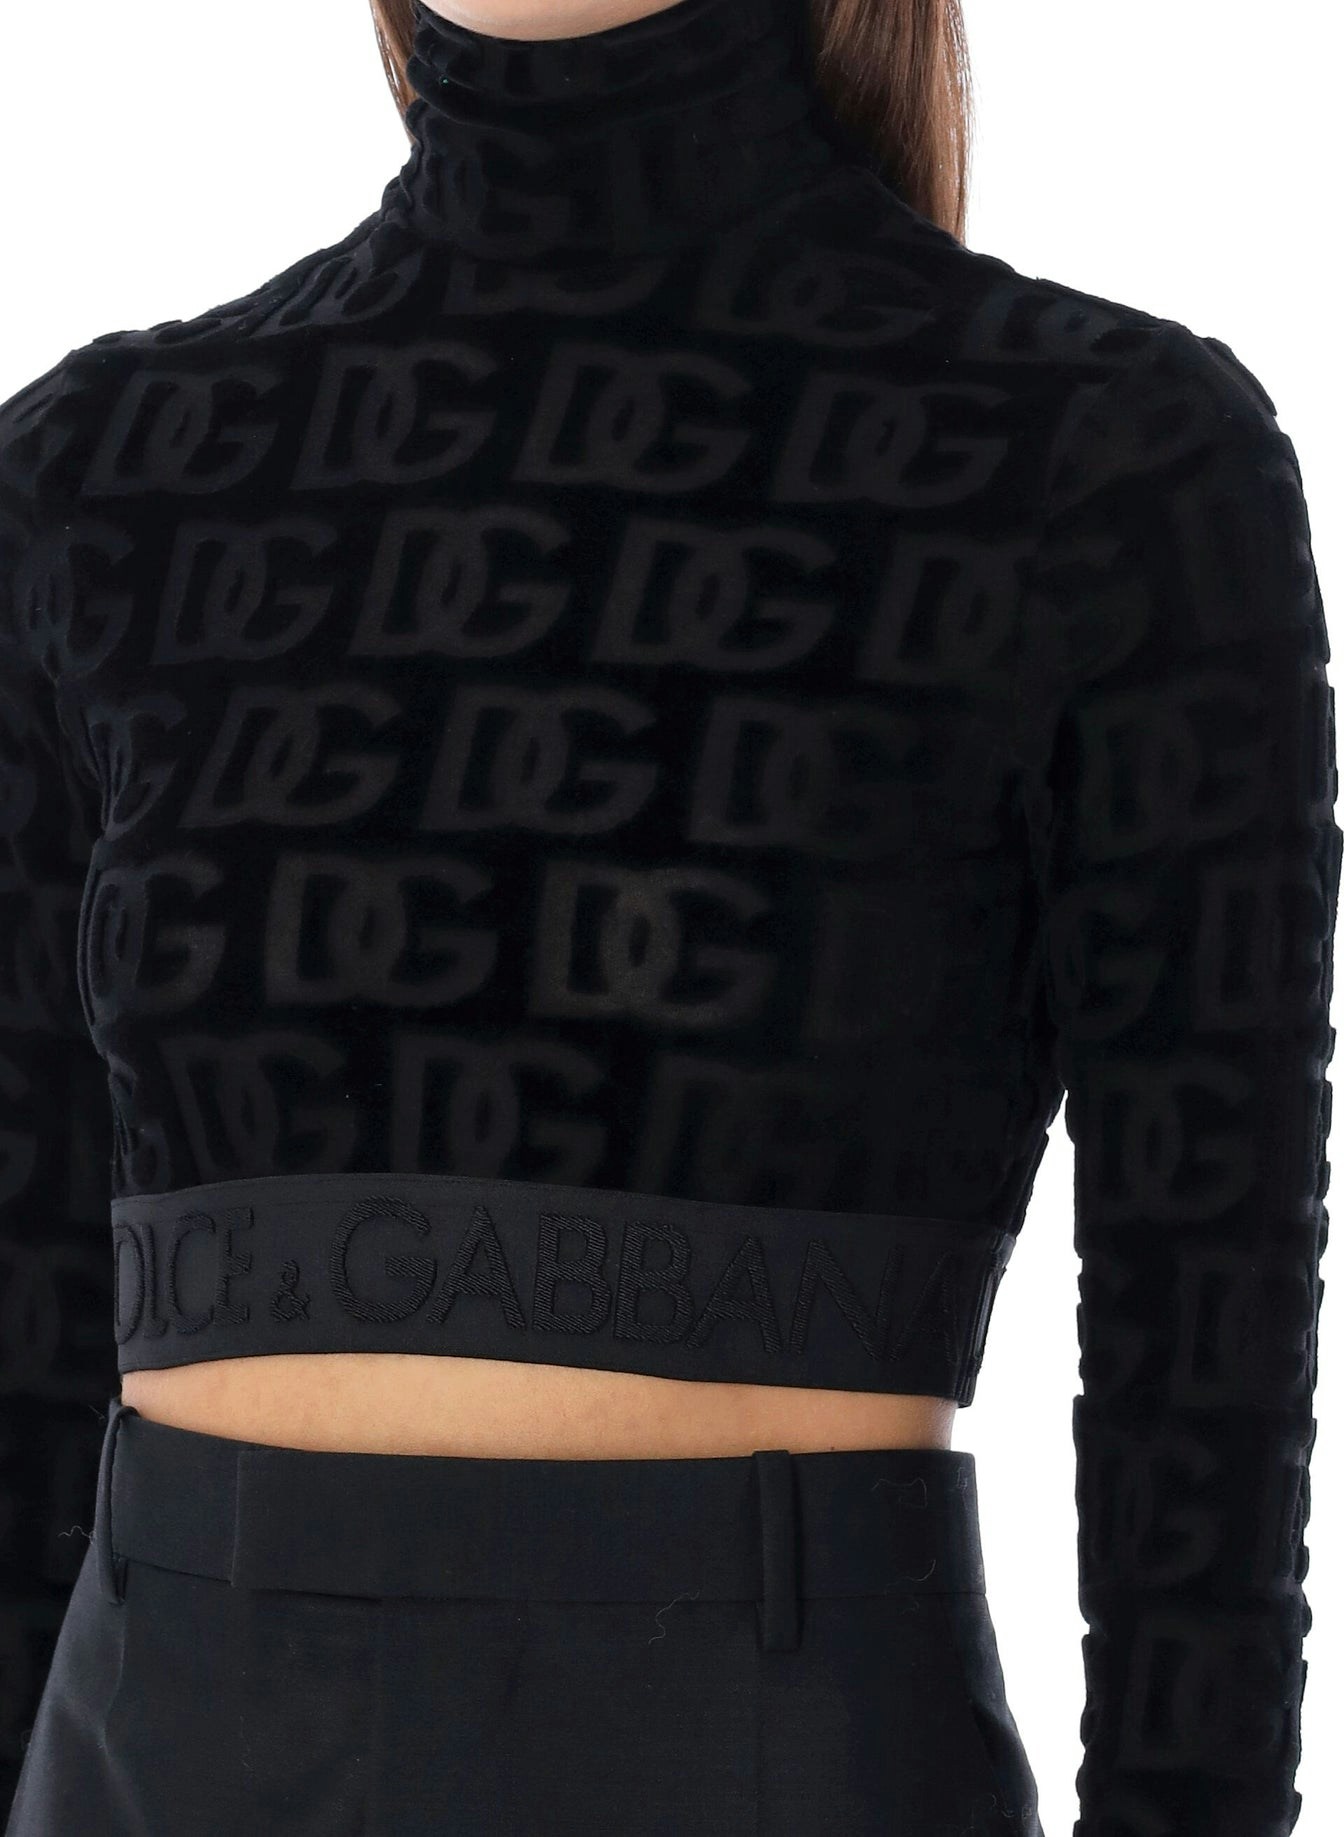 N0000 DOLCE & GABBANA LONG-SLEEVED JERSEY JACQUARD TOP WITH LOGO